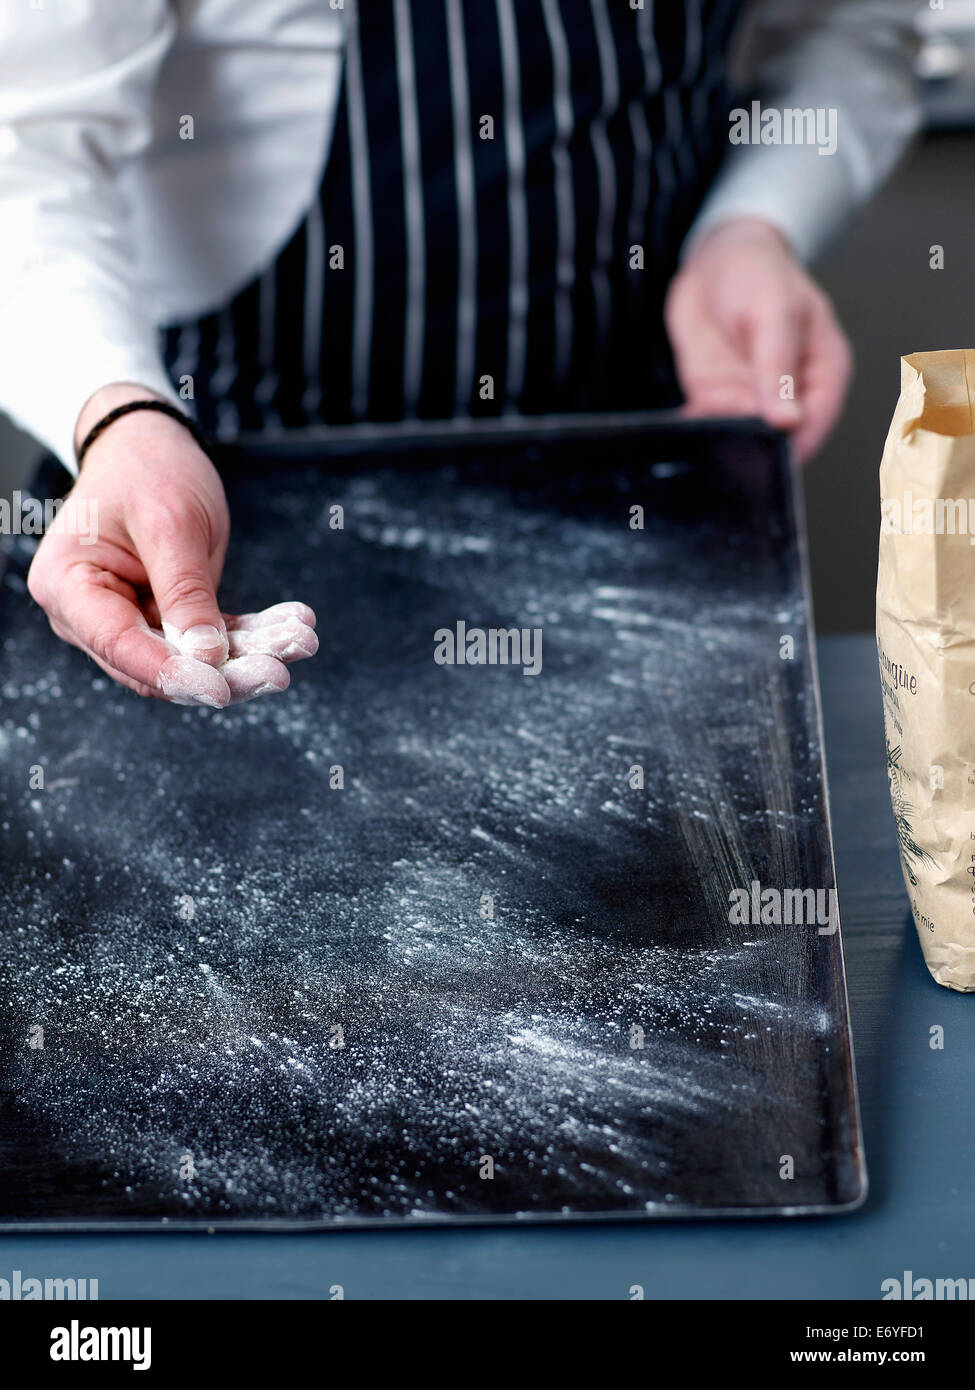 Sprinkling a little flour onto the baking tray Stock Photo